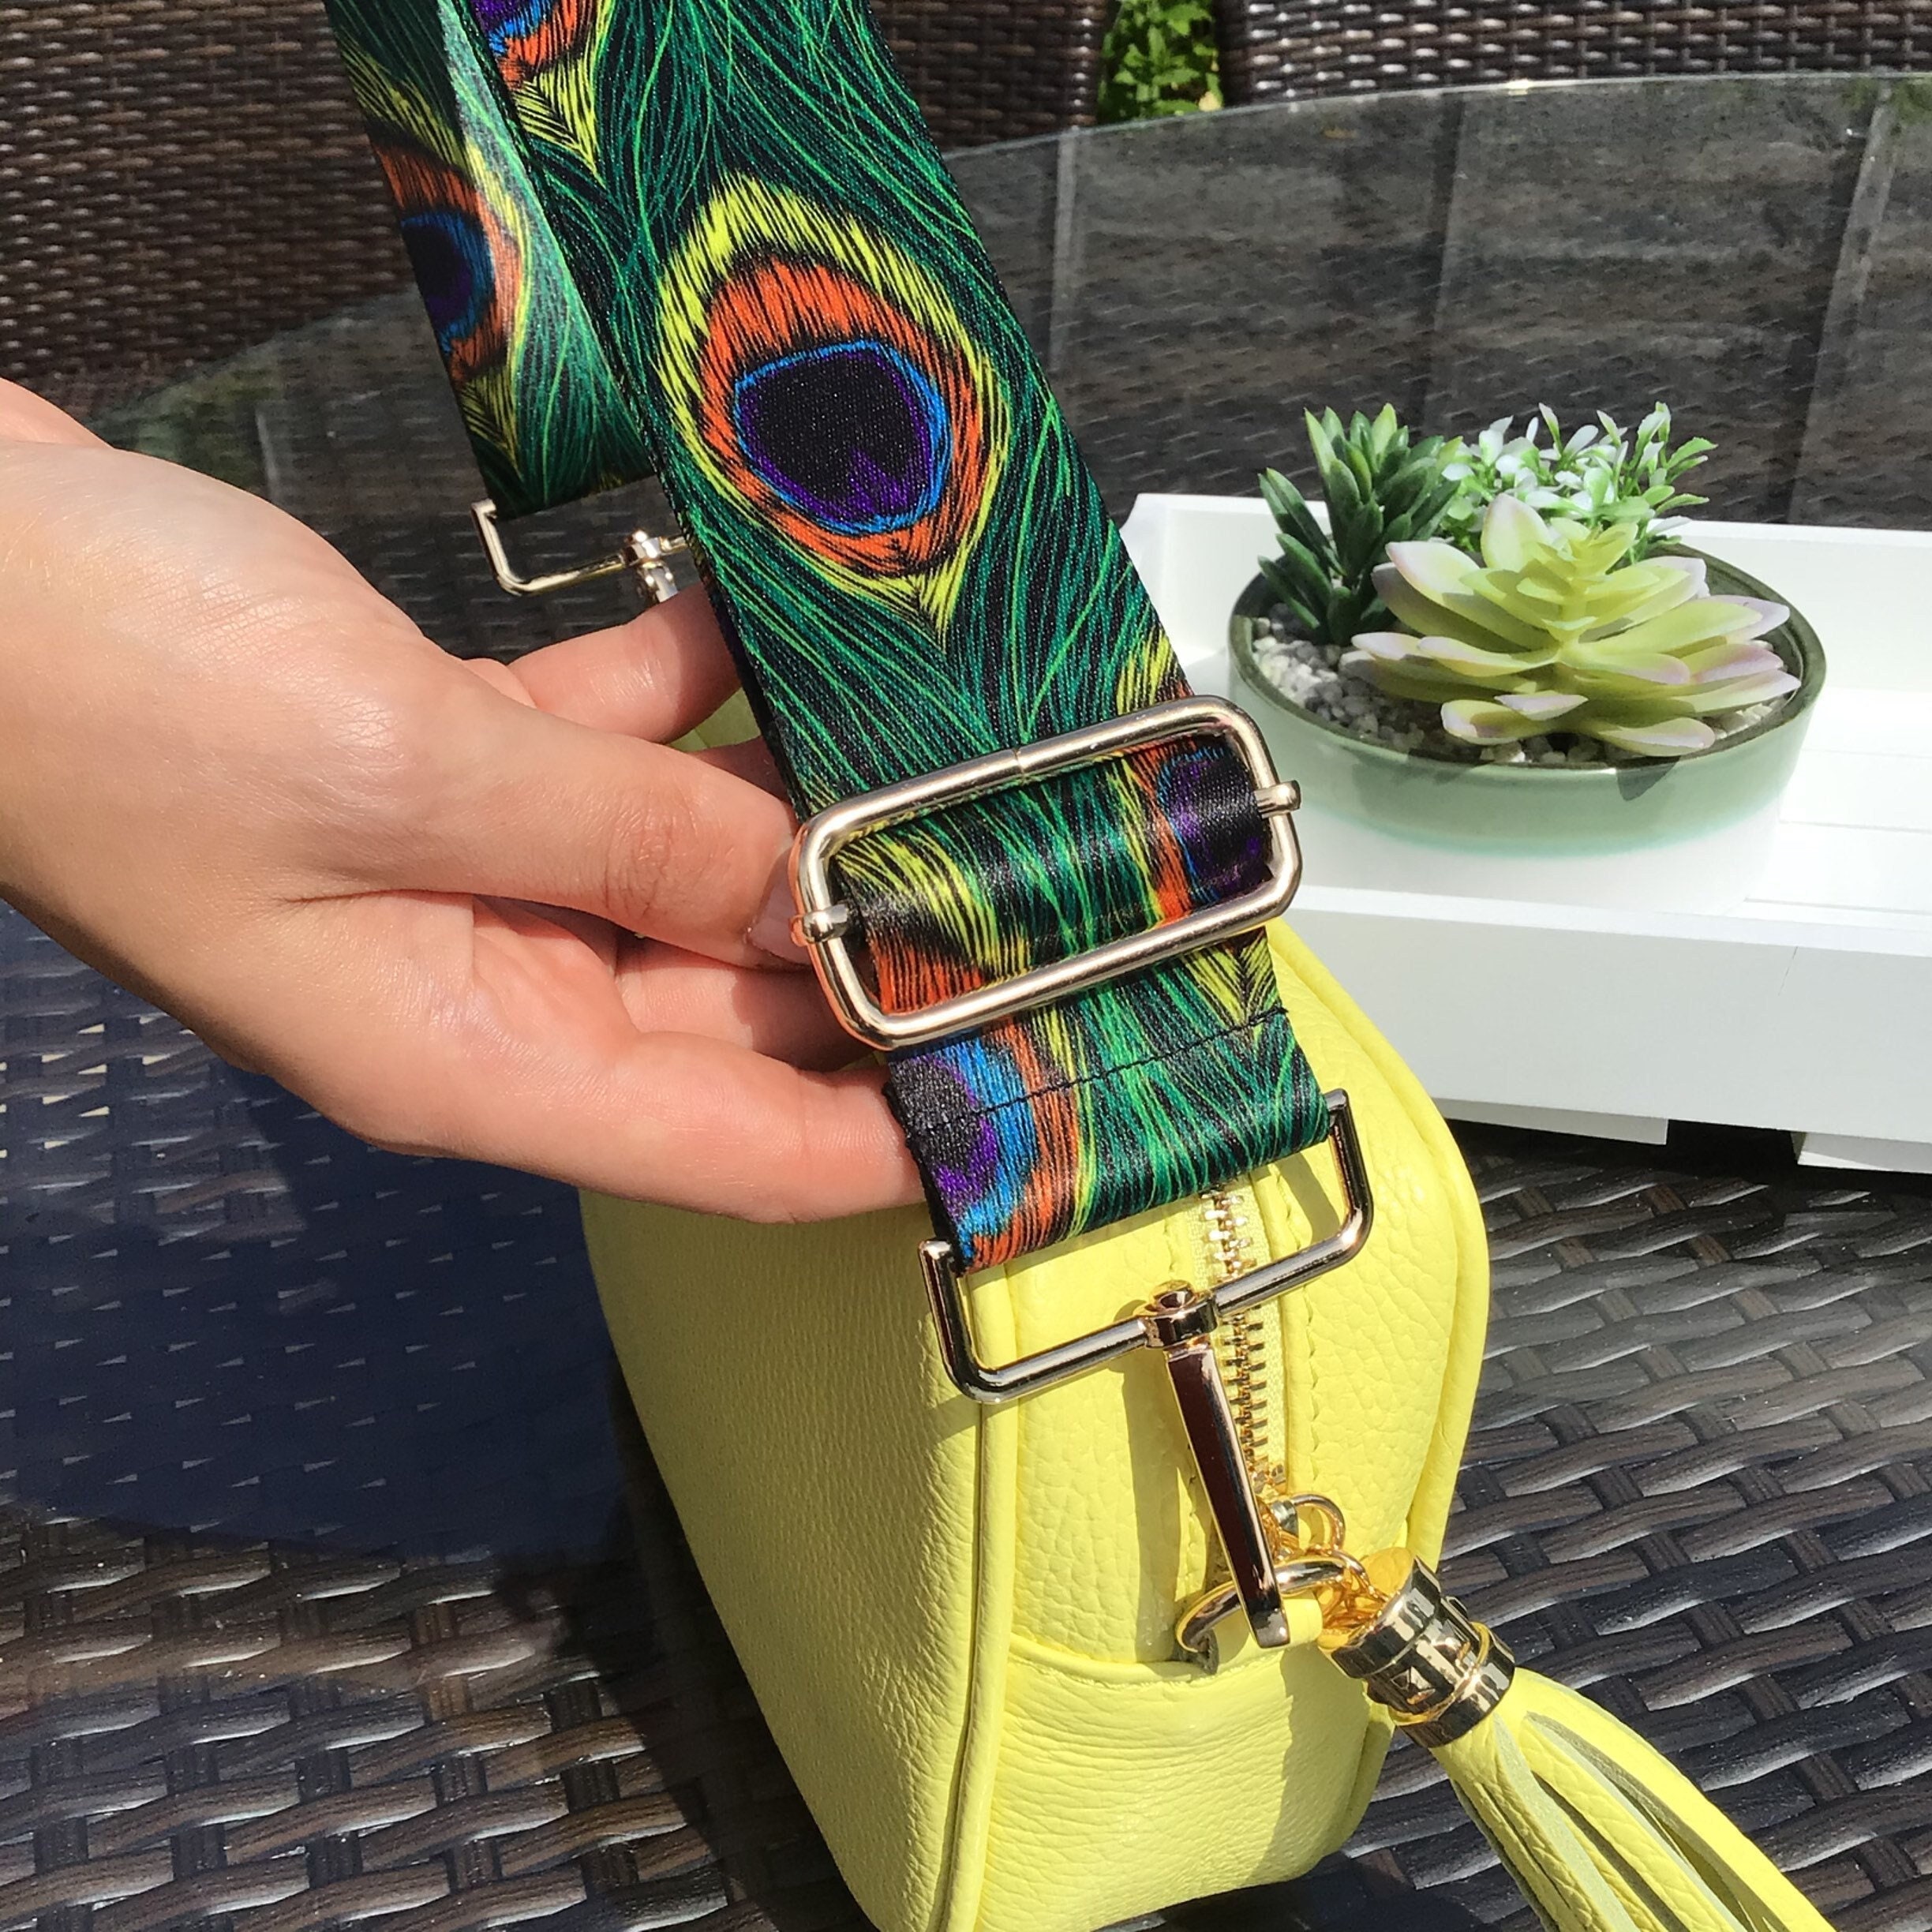 Hand Painted Feather-Themed Leather Sling Bag from India